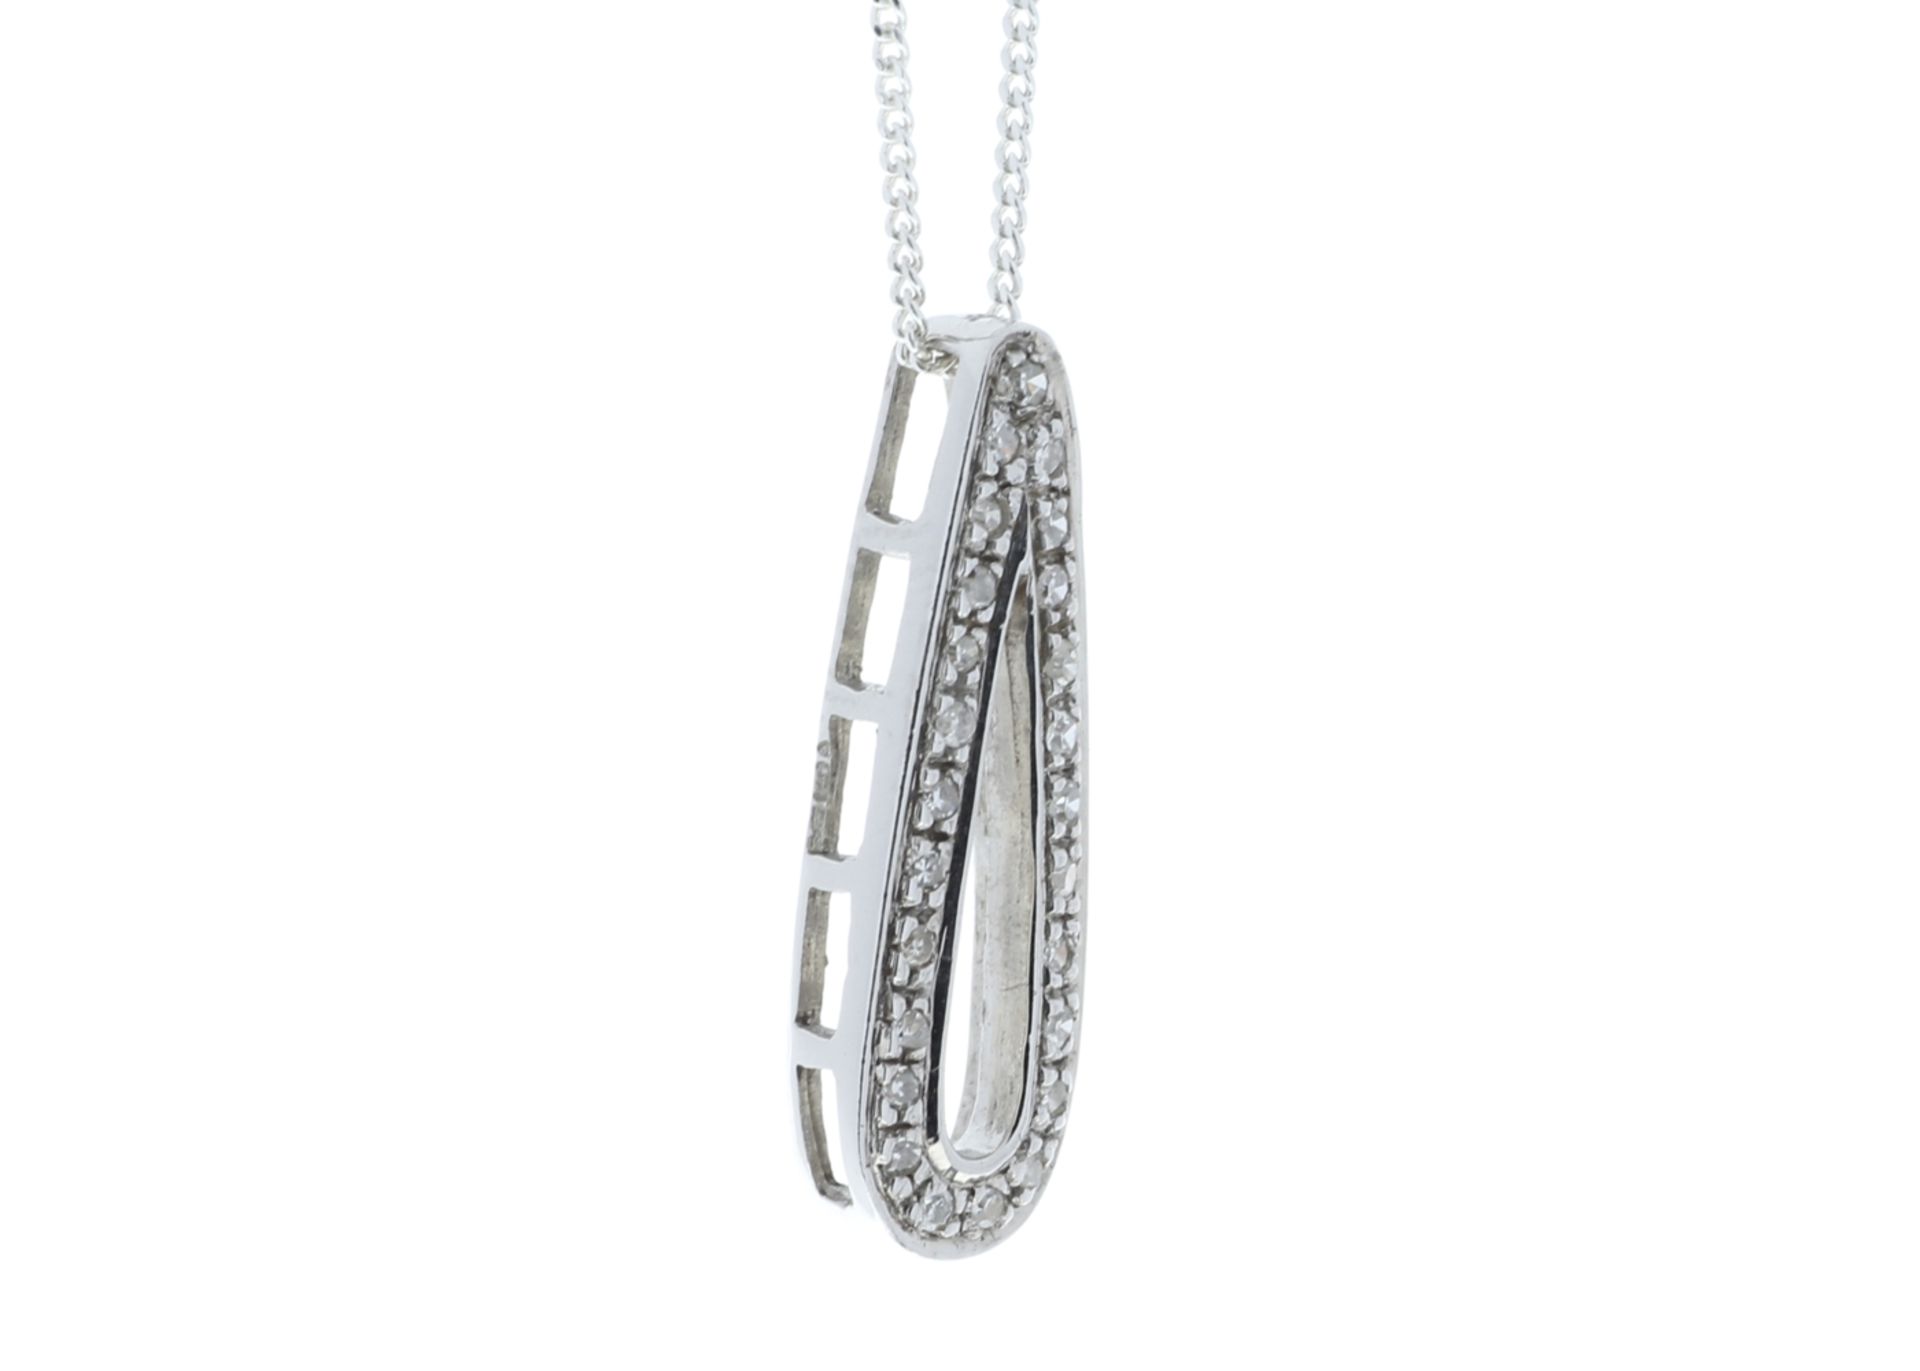 9ct White Gold Fancy Cluster Teardrop Shape Diamond Pendant 0.12 Carats - Valued by GIE £1,820. - Image 2 of 5